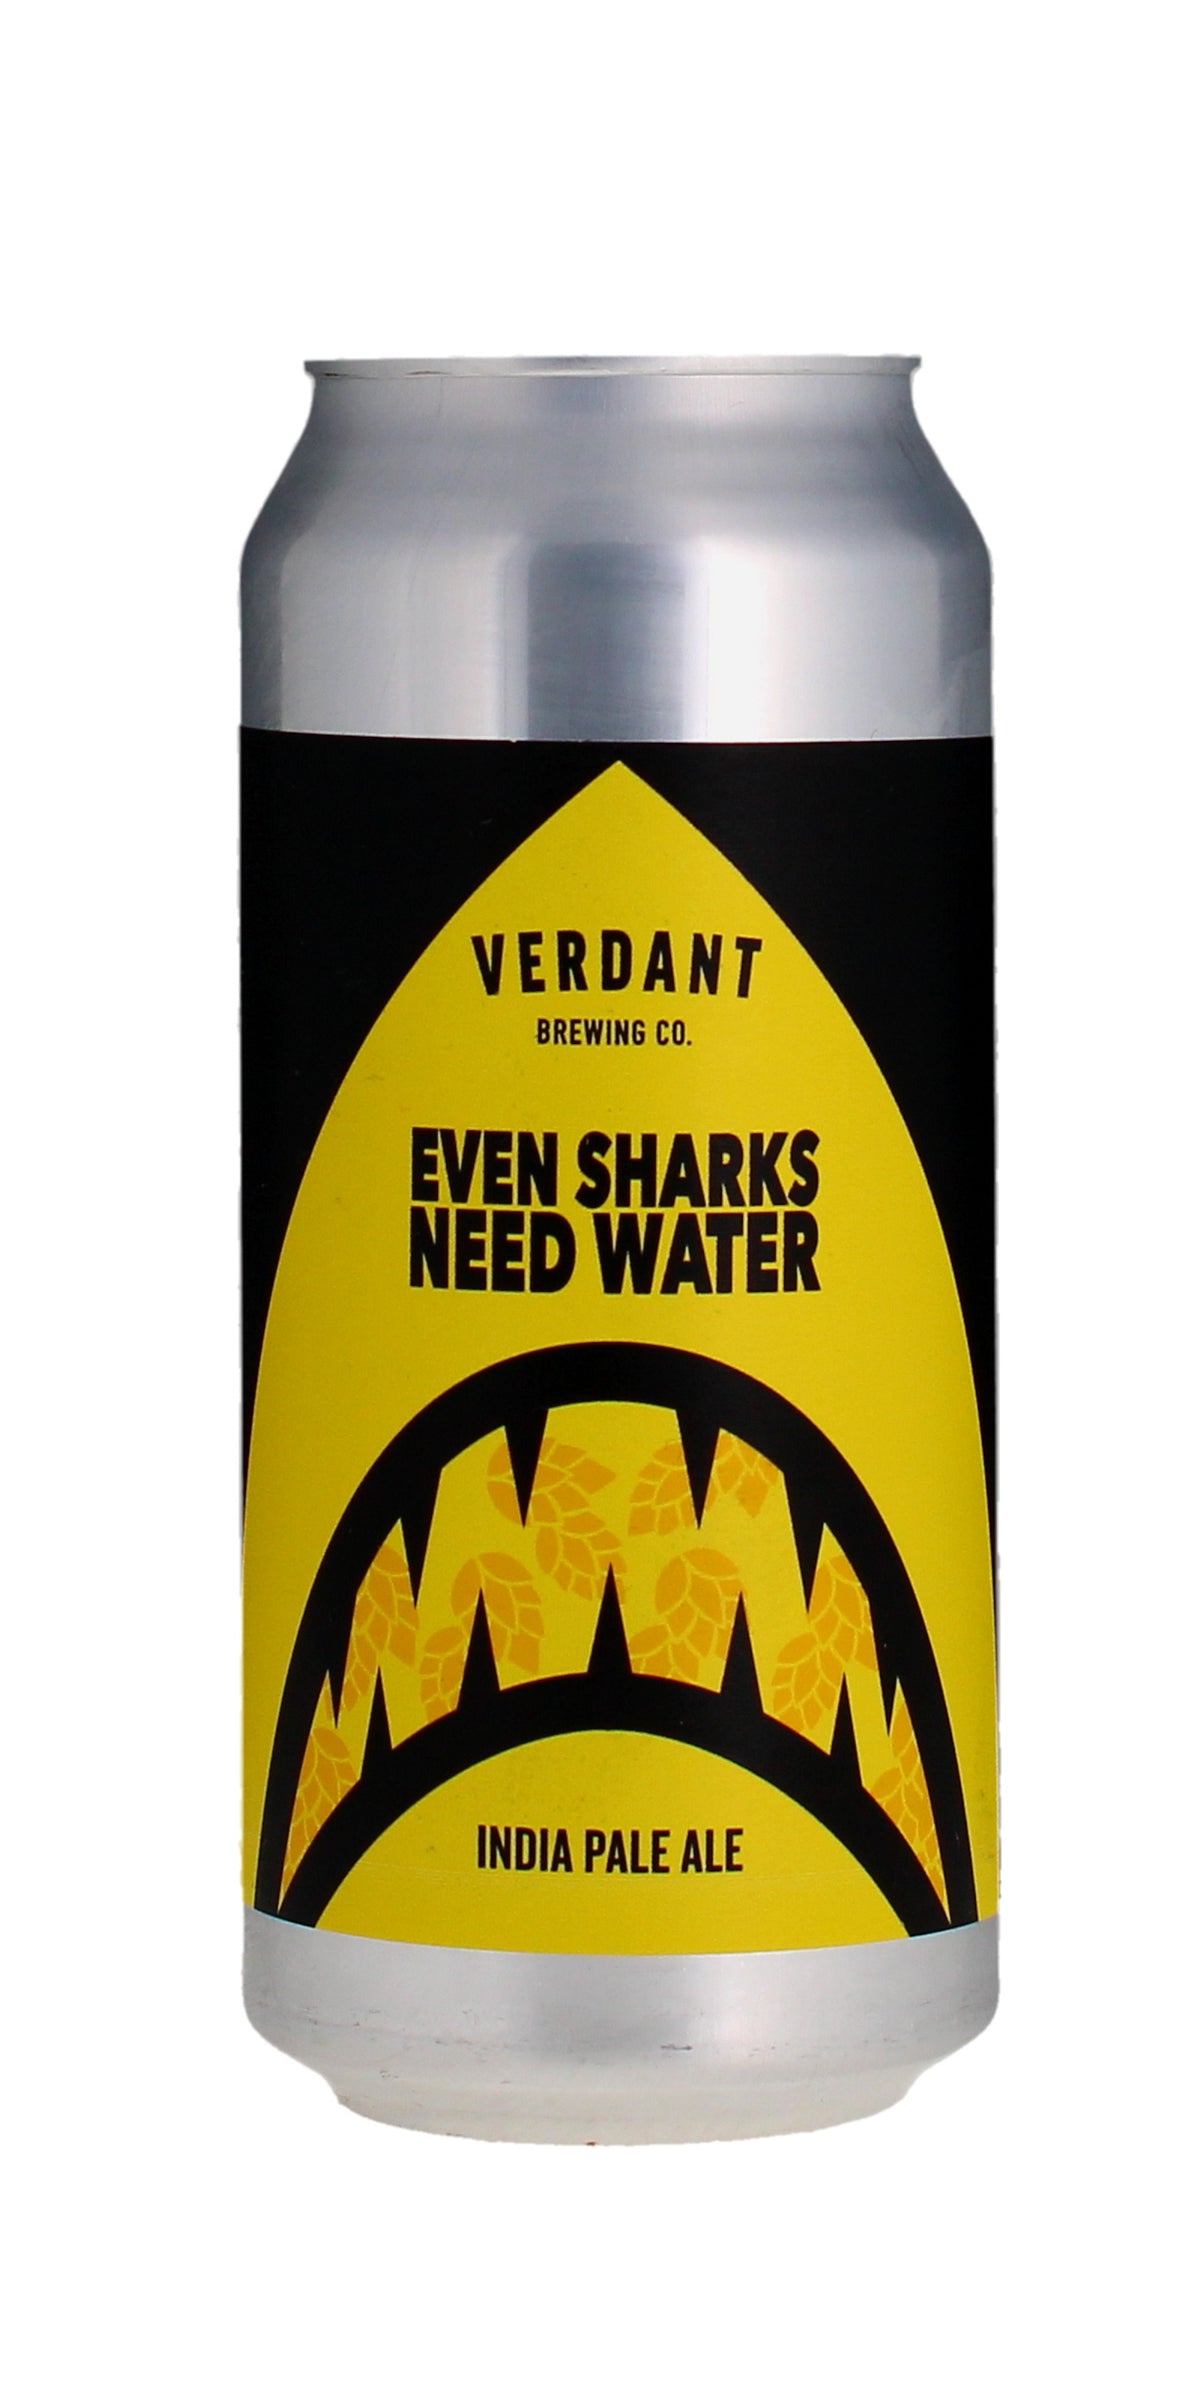 Verdant Even Sharks Need Water / Orcas Need Clean Water 6.5% IPA 440ml can